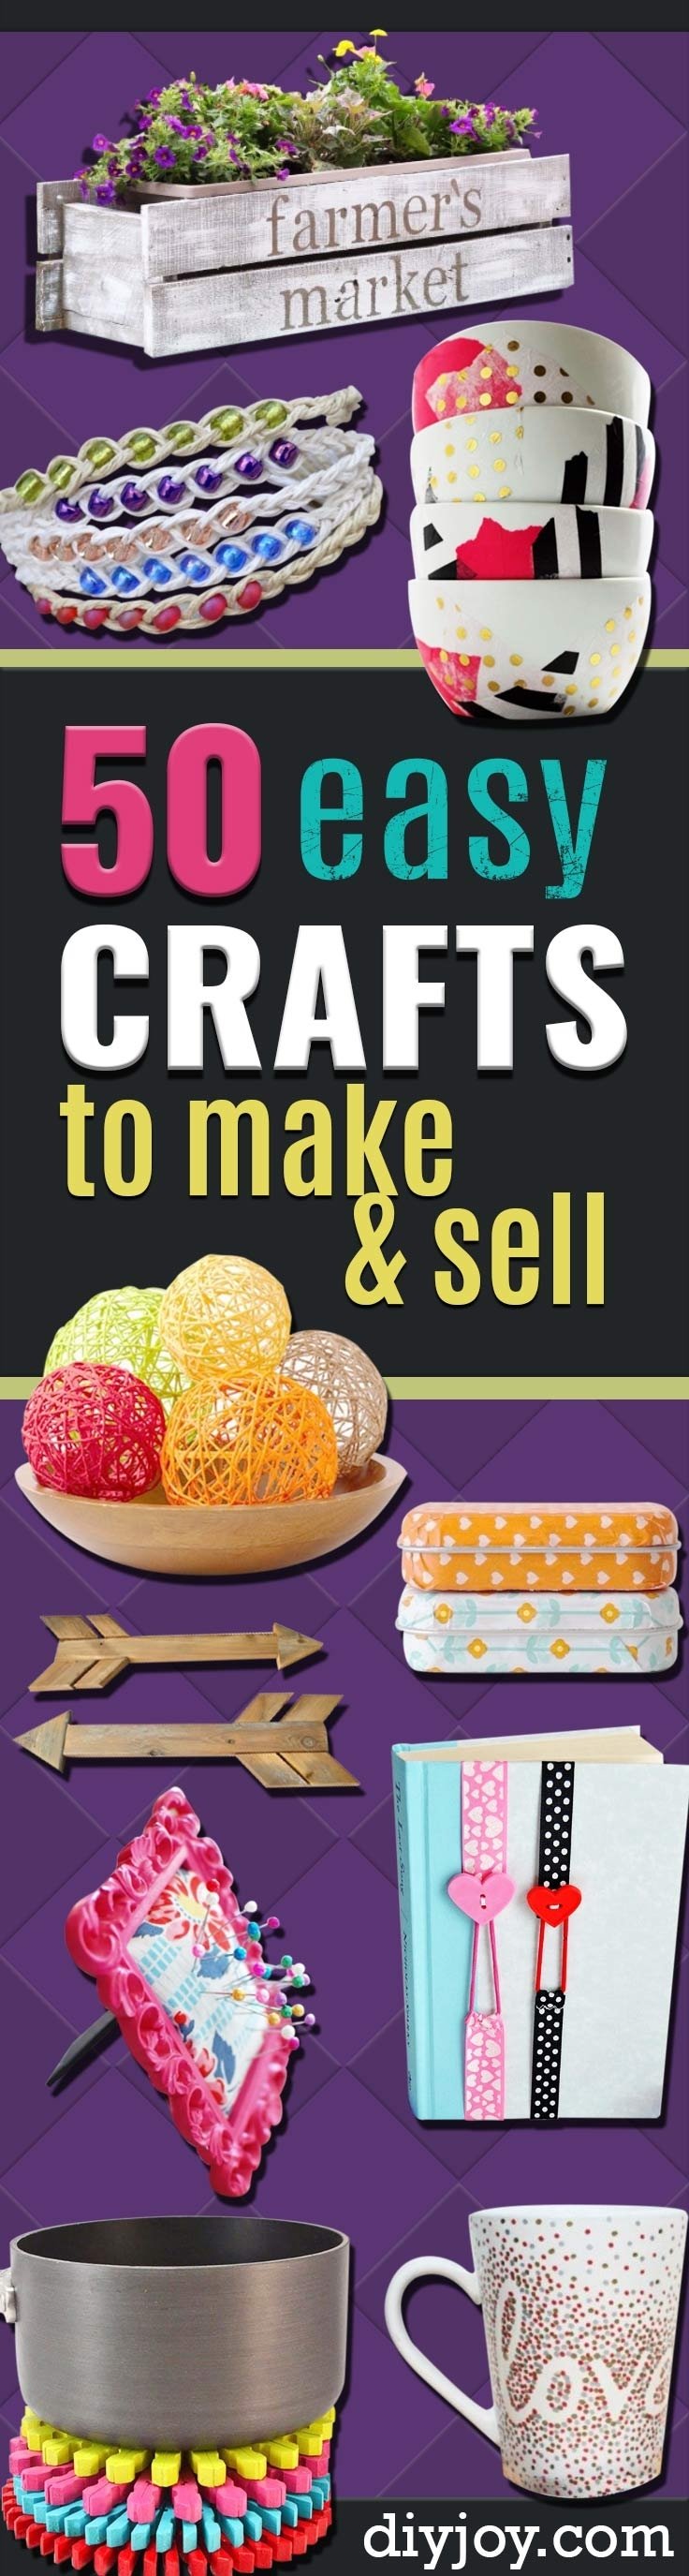 10 Most Popular Easy Craft Ideas To Sell 50 easy crafts to make and sell 5 2022